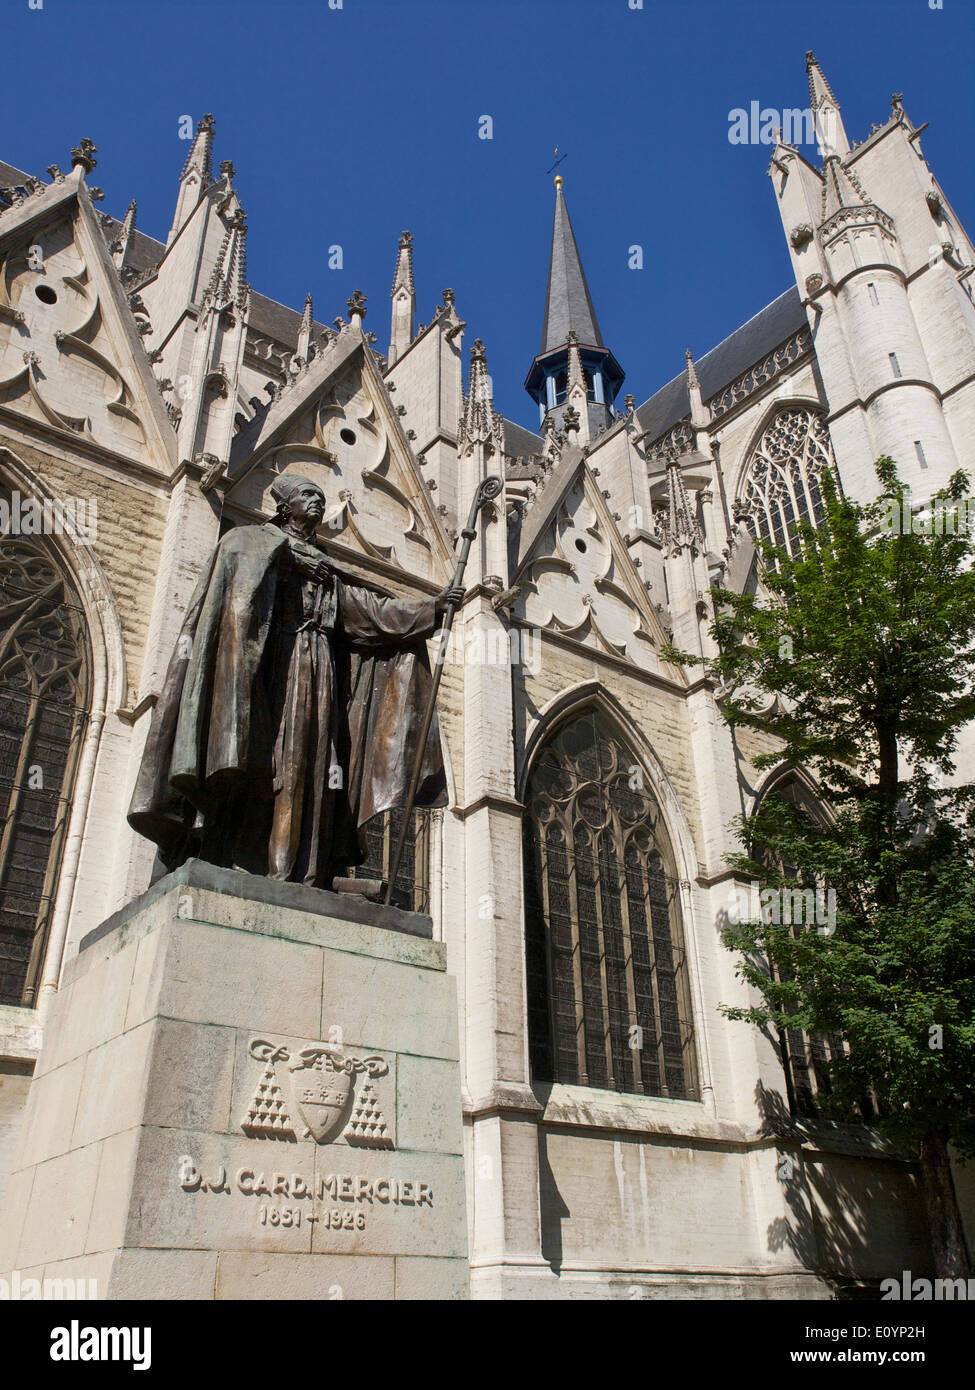 Statue of cardinal Mercier at the St. Michiels en Goedele cathedral in Brussels, Belgium Stock Photo